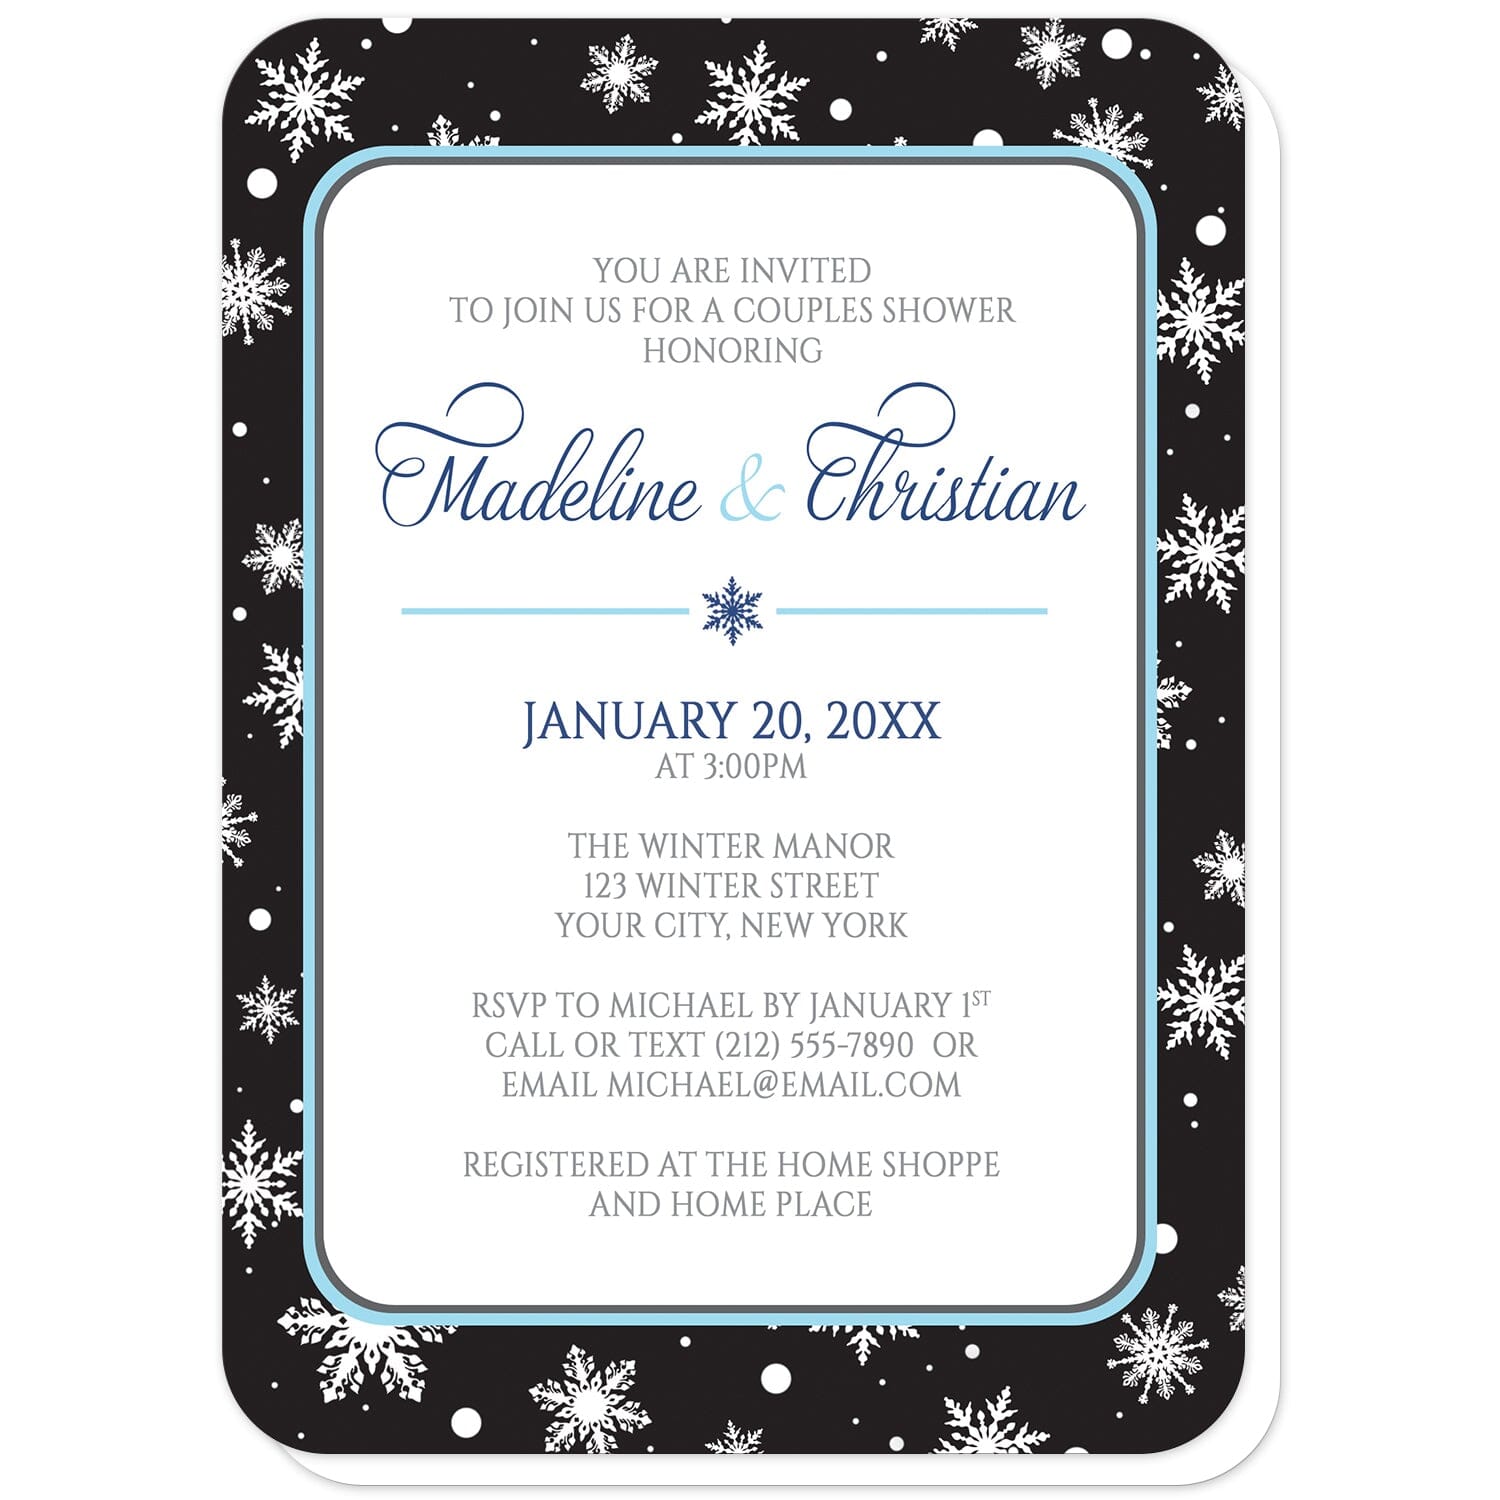 Midnight Snowflake Winter Couples Shower Invitations (with rounded corners) at Artistically Invited. Midnight snowflake winter couples shower invitations with white snowflakes over a black background. Your personalized couples shower celebration details are custom printed in navy blue, aqua blue, and medium gray over a white rectangular area outlined in aqua and navy blue.